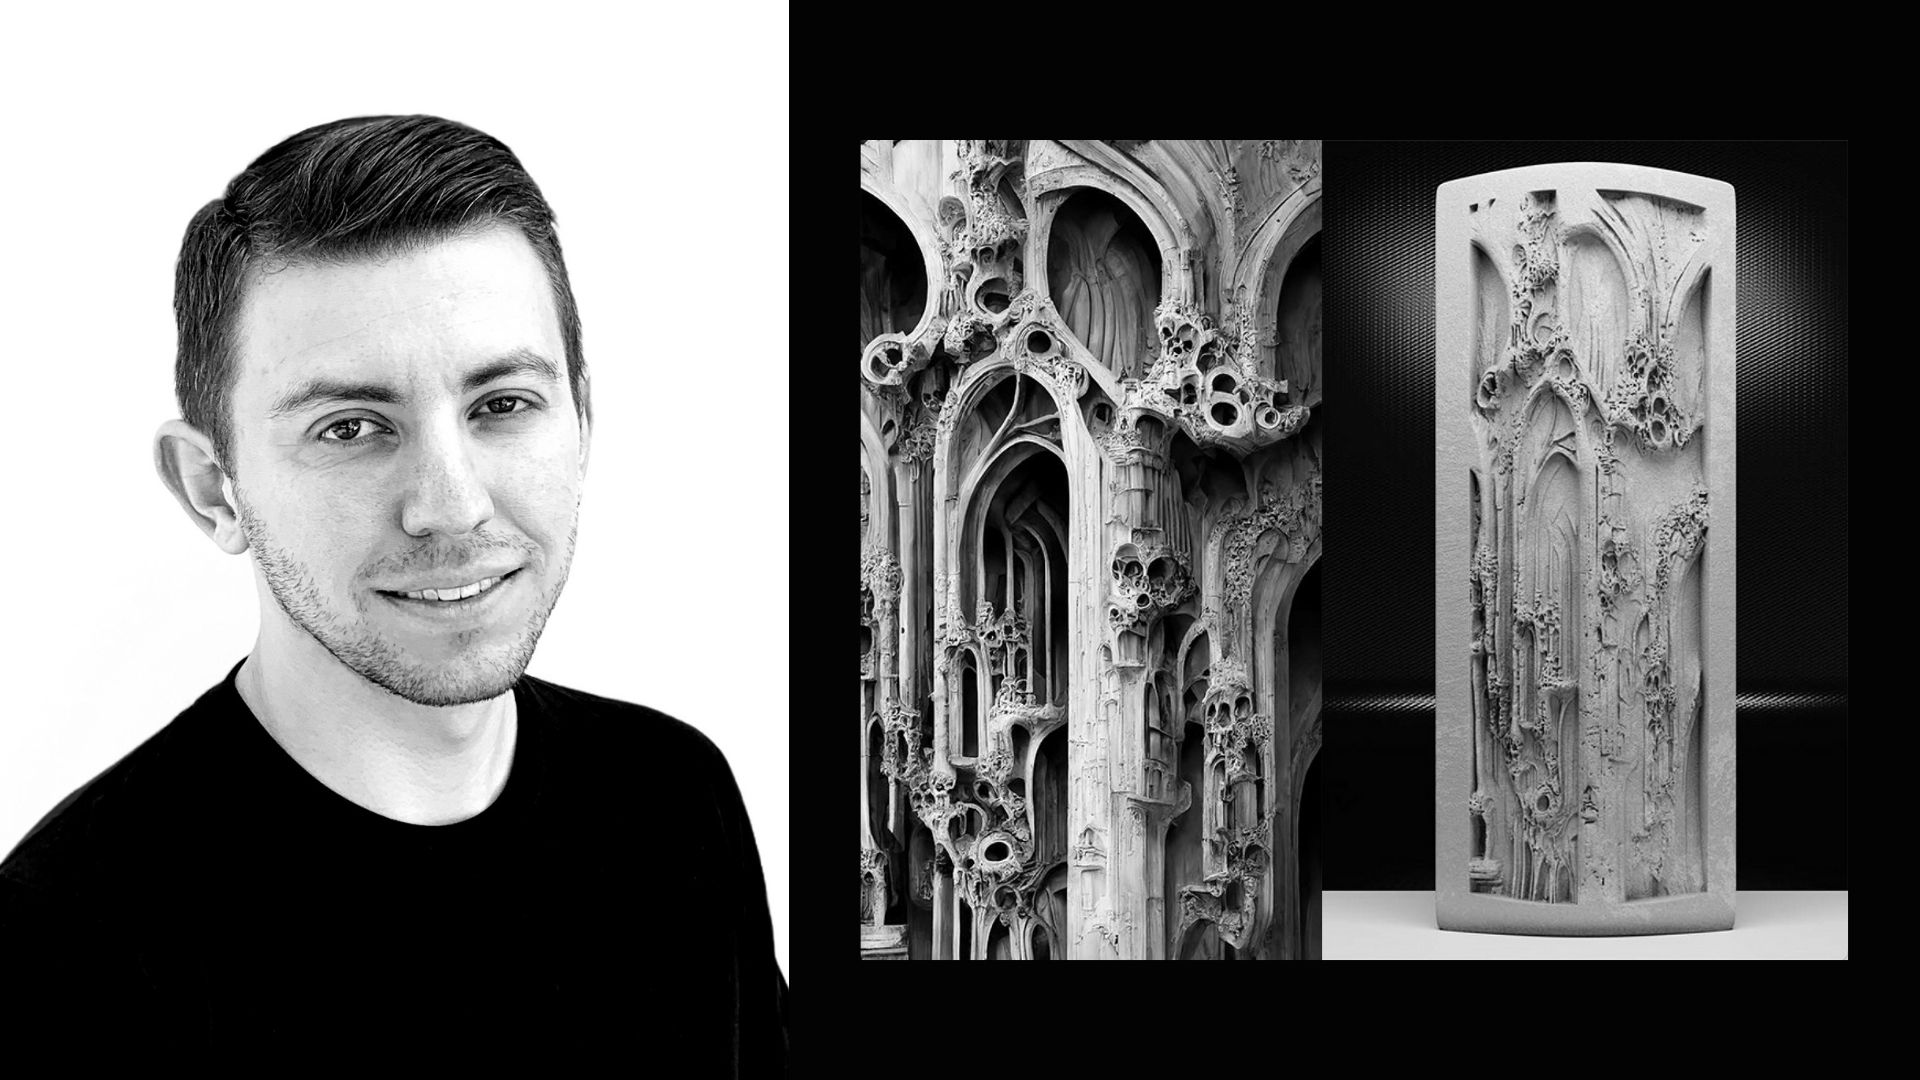 FAU SOA WELCOMES DUSTIN WHITE OUR NEW ASSISTANT PROFESSOR OF STRUCTURAL DESIGN